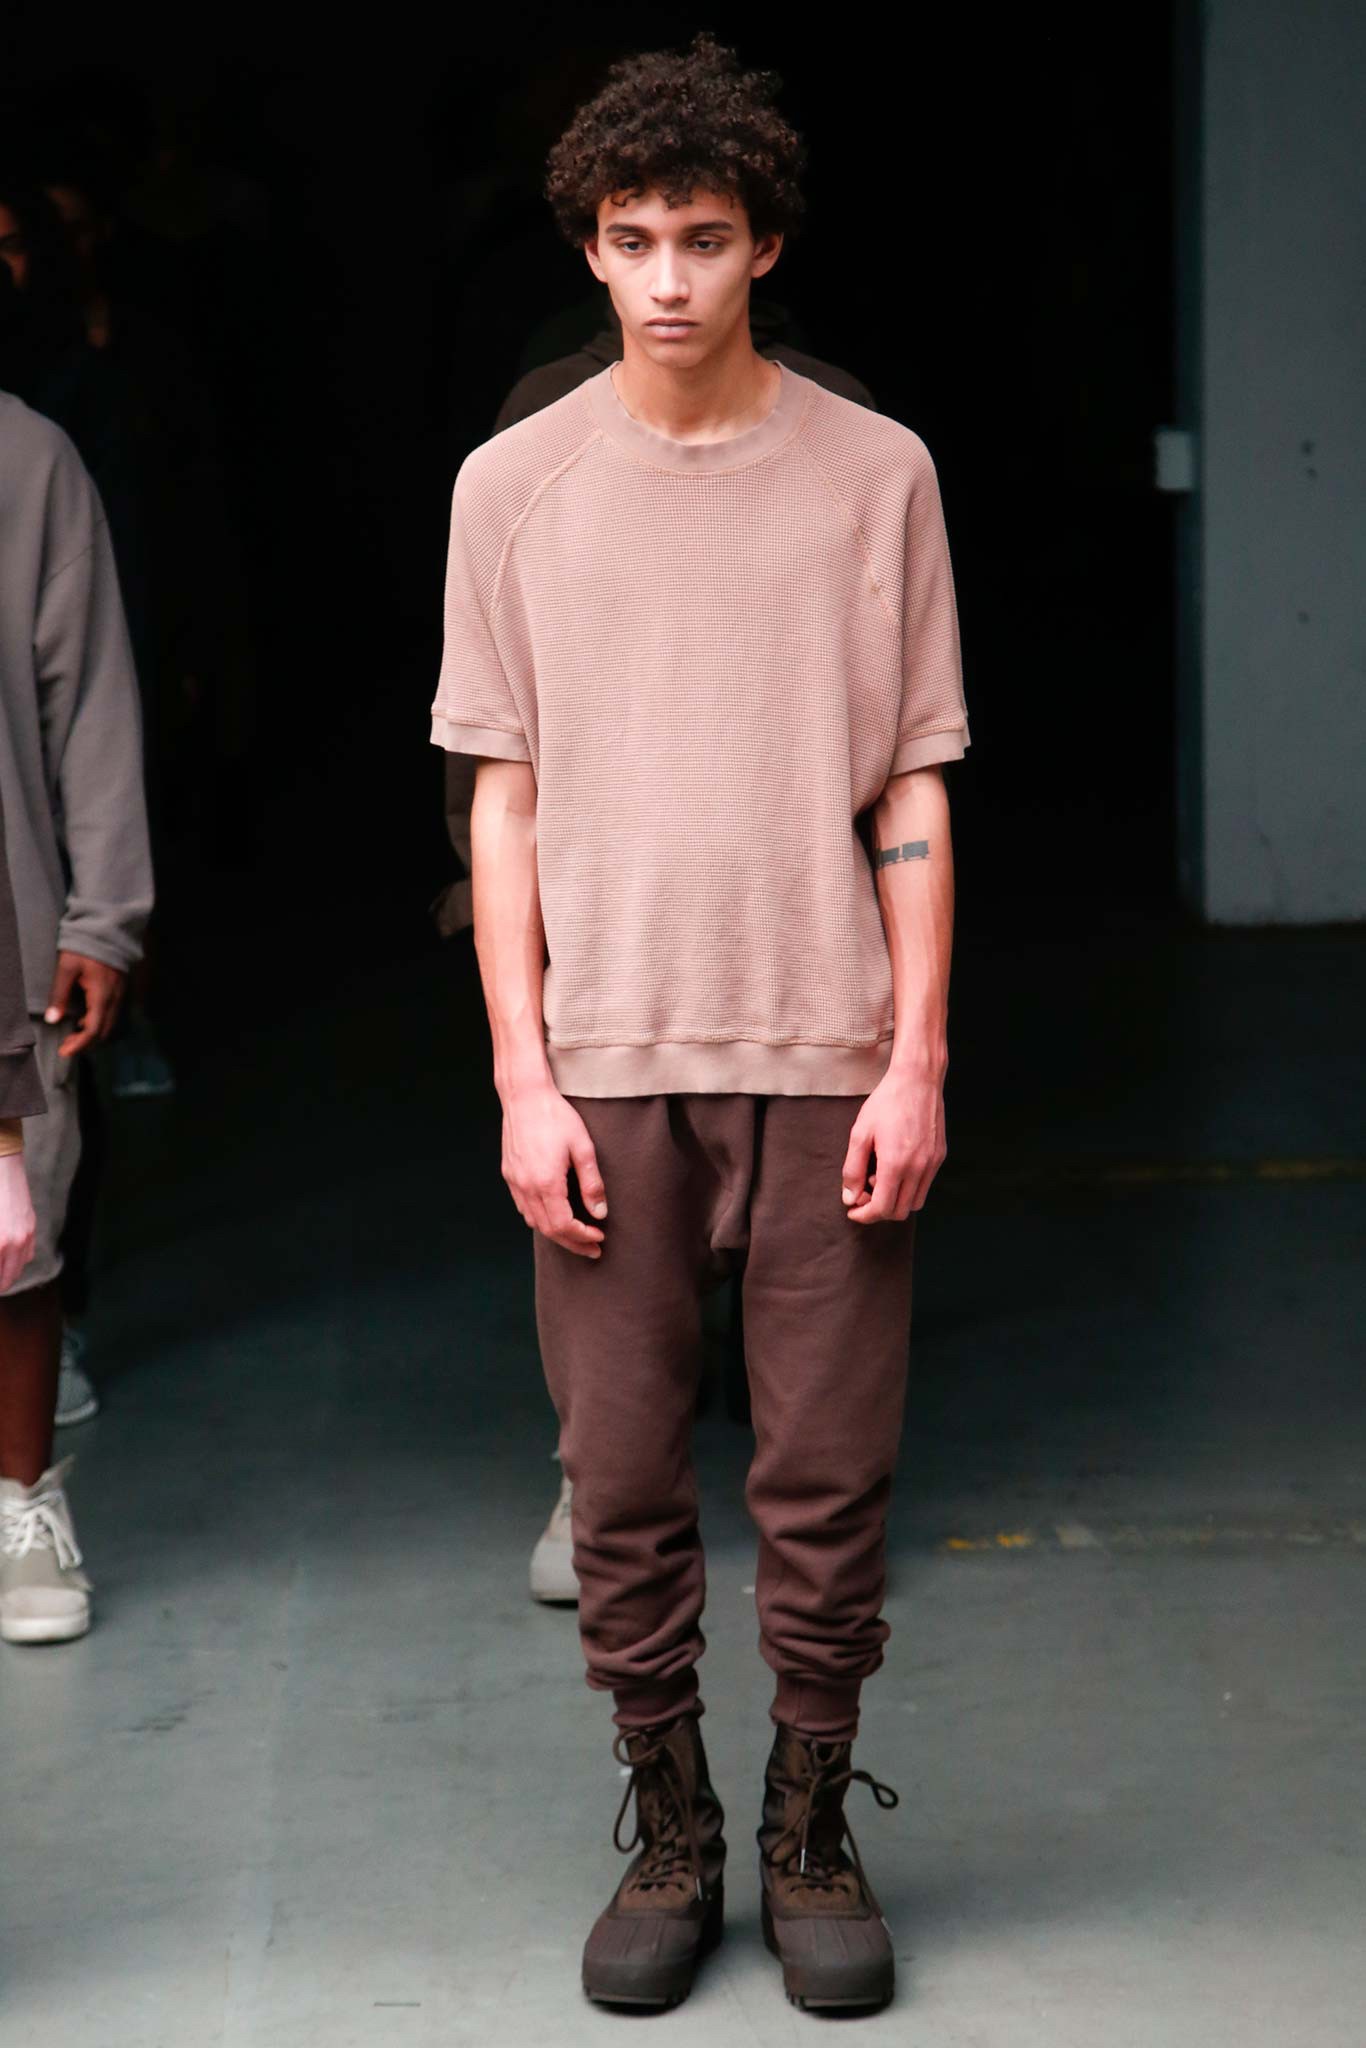 Kanye West Adidas Fall Winter 2015 Mens Collection Photos 012